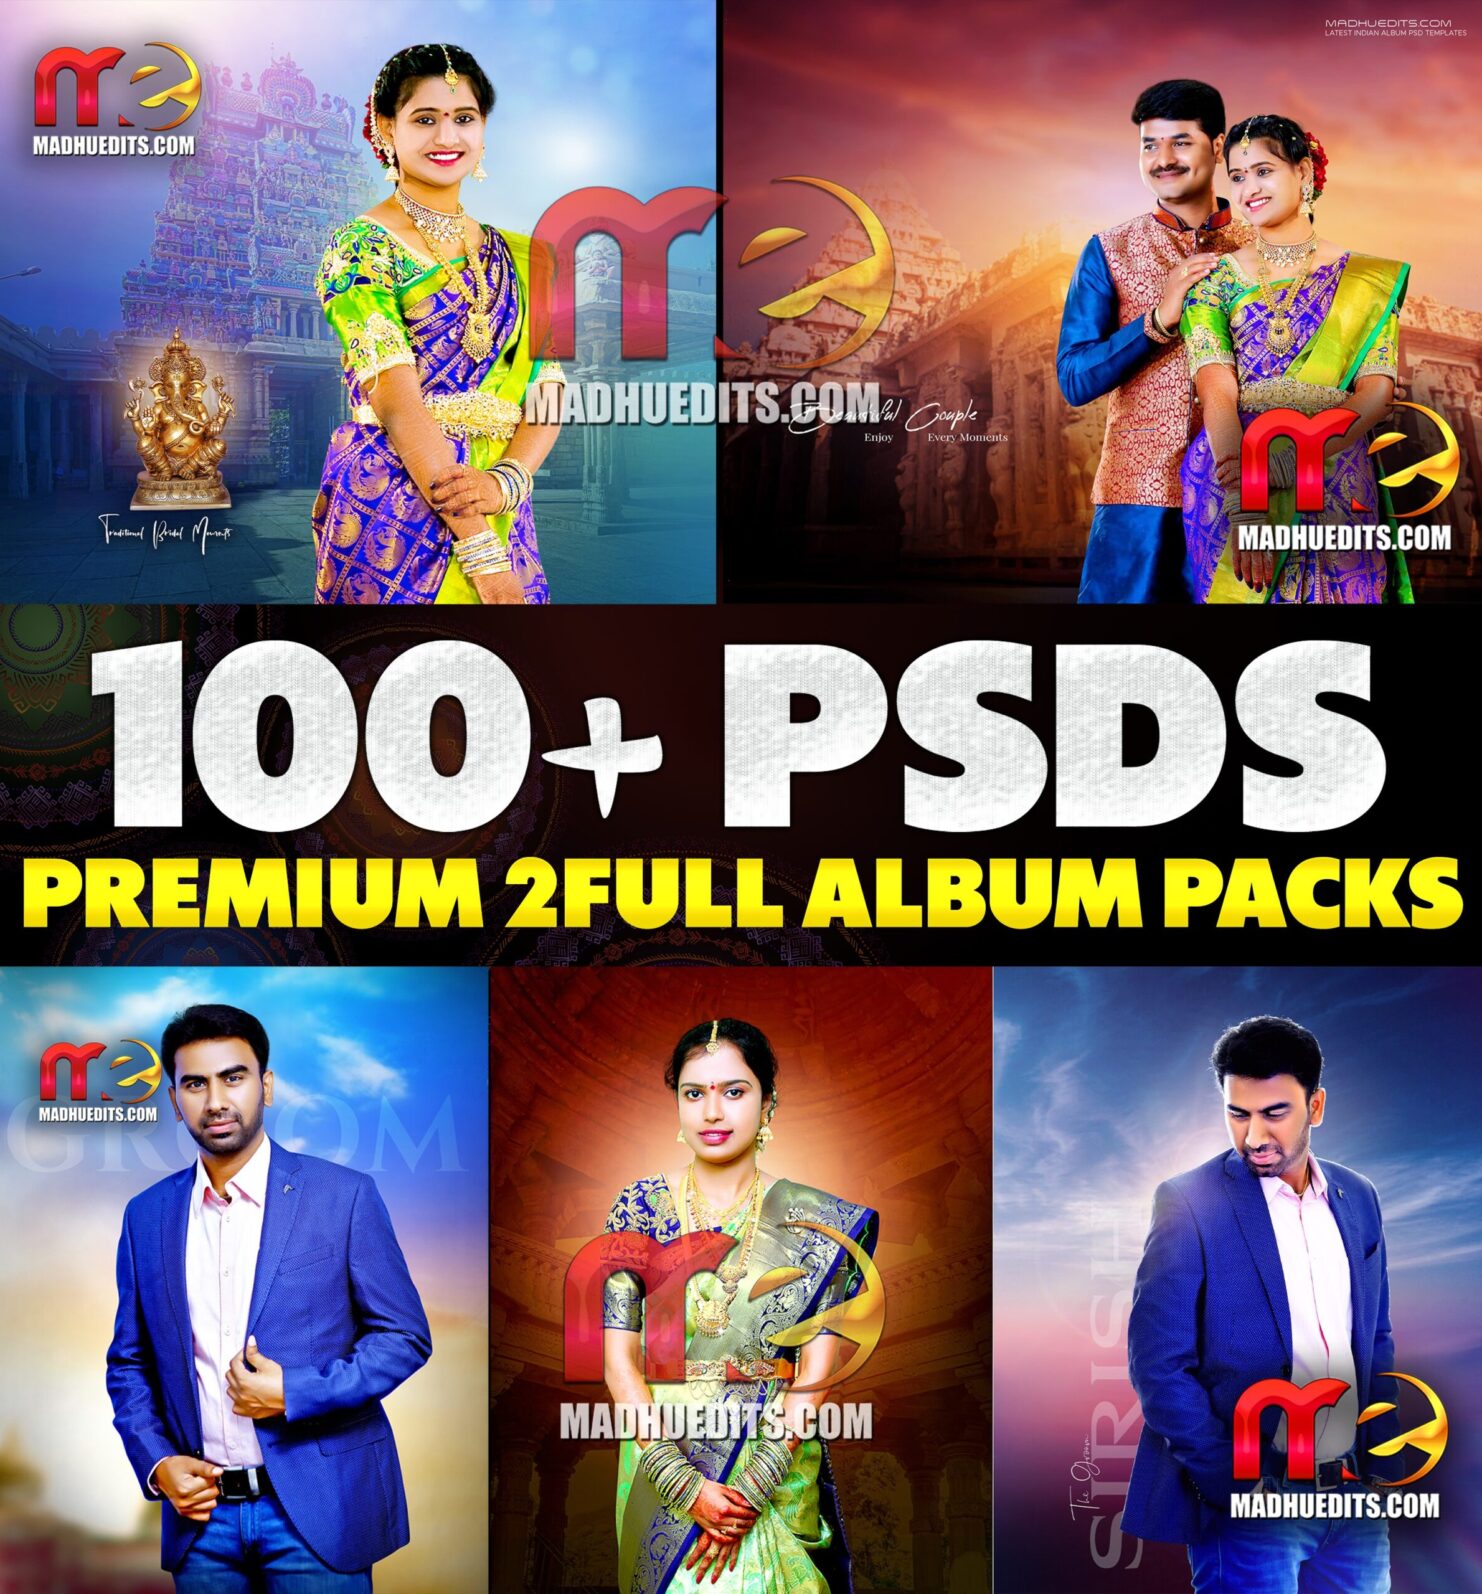 TRADITIONAL 2 FULL ALBUM PACKAGES – 100+ PSDS